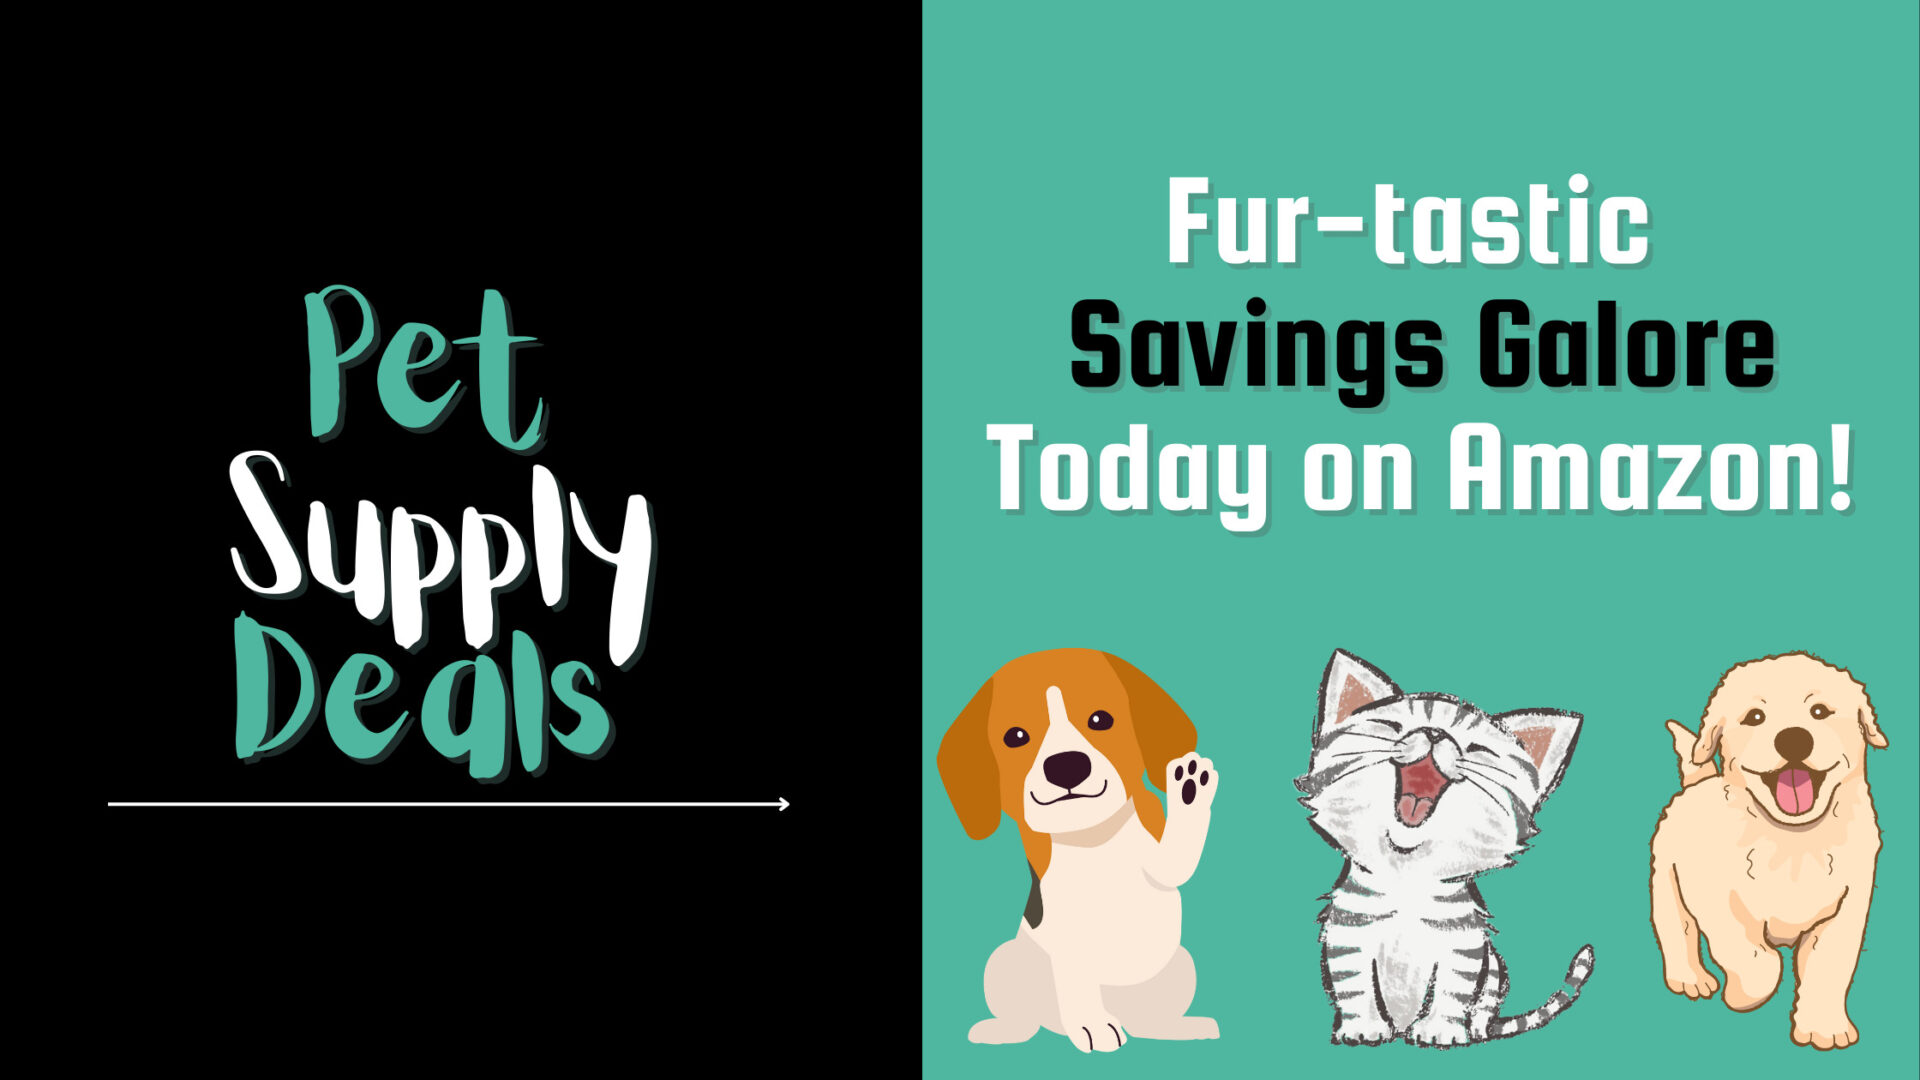 Banner image for the post, "Pet Supply Deals: Fur-tastic Savings Galore Today on Amazon!" featuring cartoon drawings of cats and dogs.